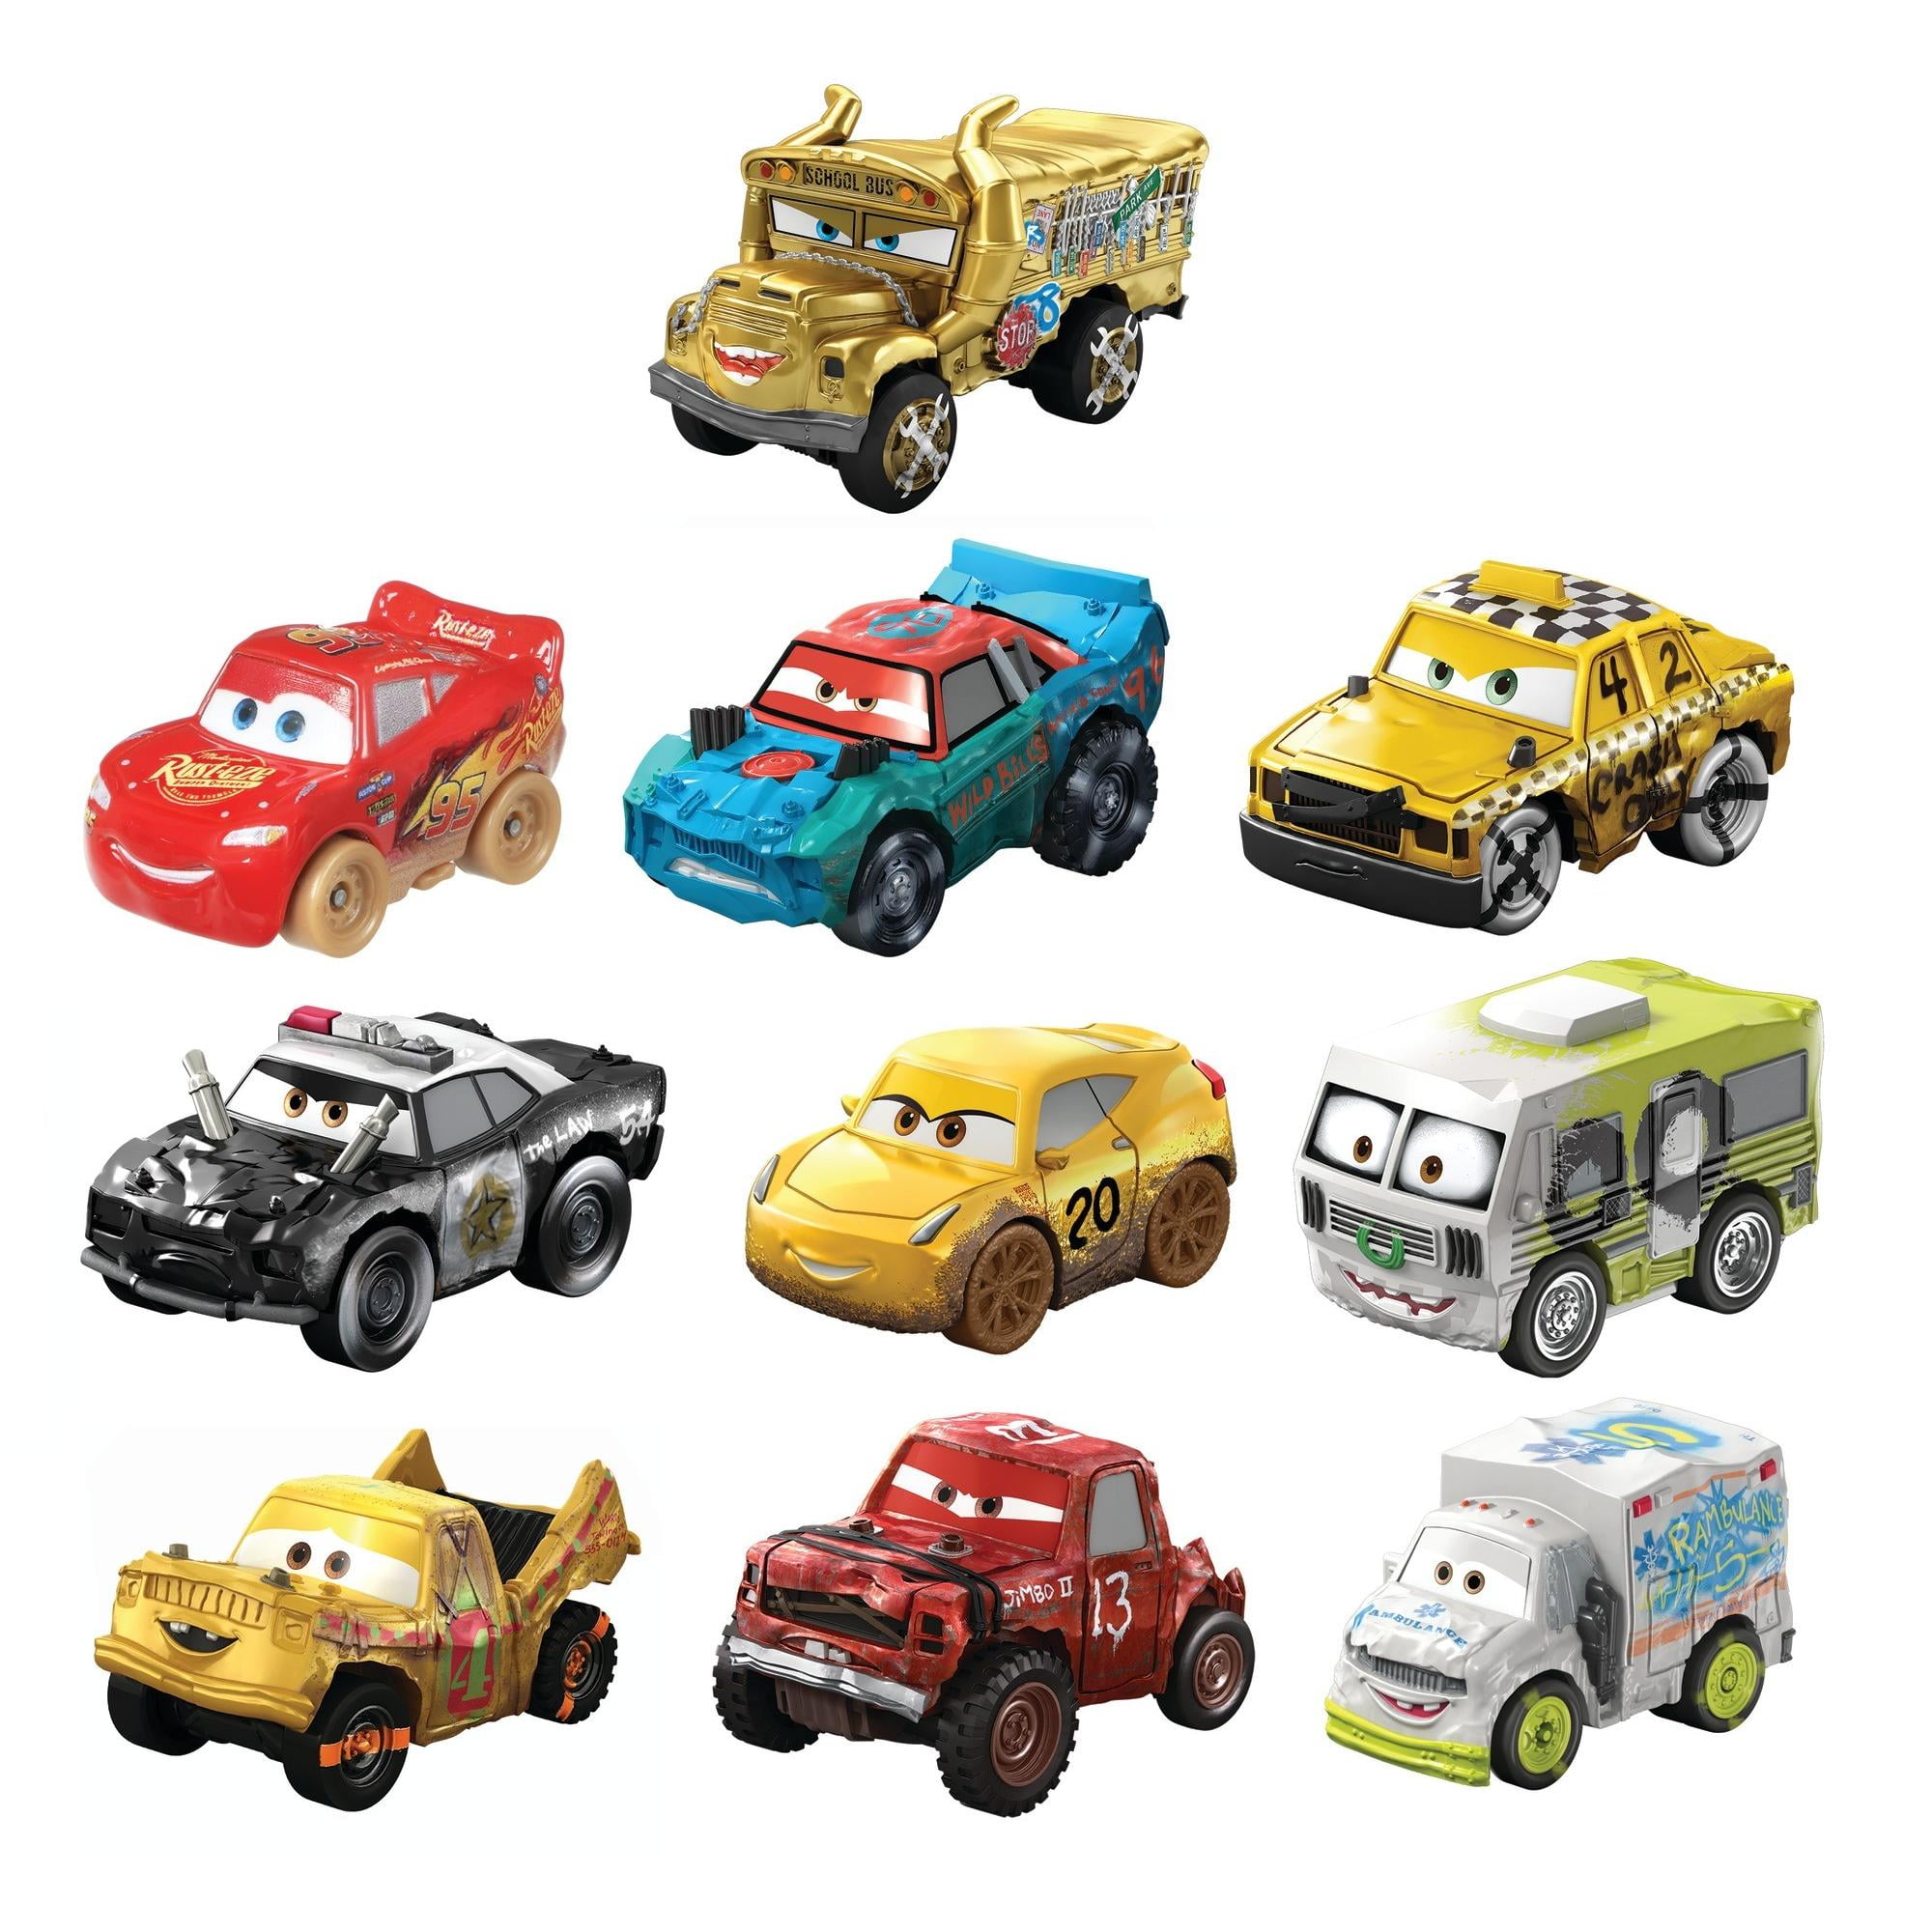 Disney Pixar Cars Mini Racers Collector Set of 15 With Will Rusch Miss Fritter for sale online 